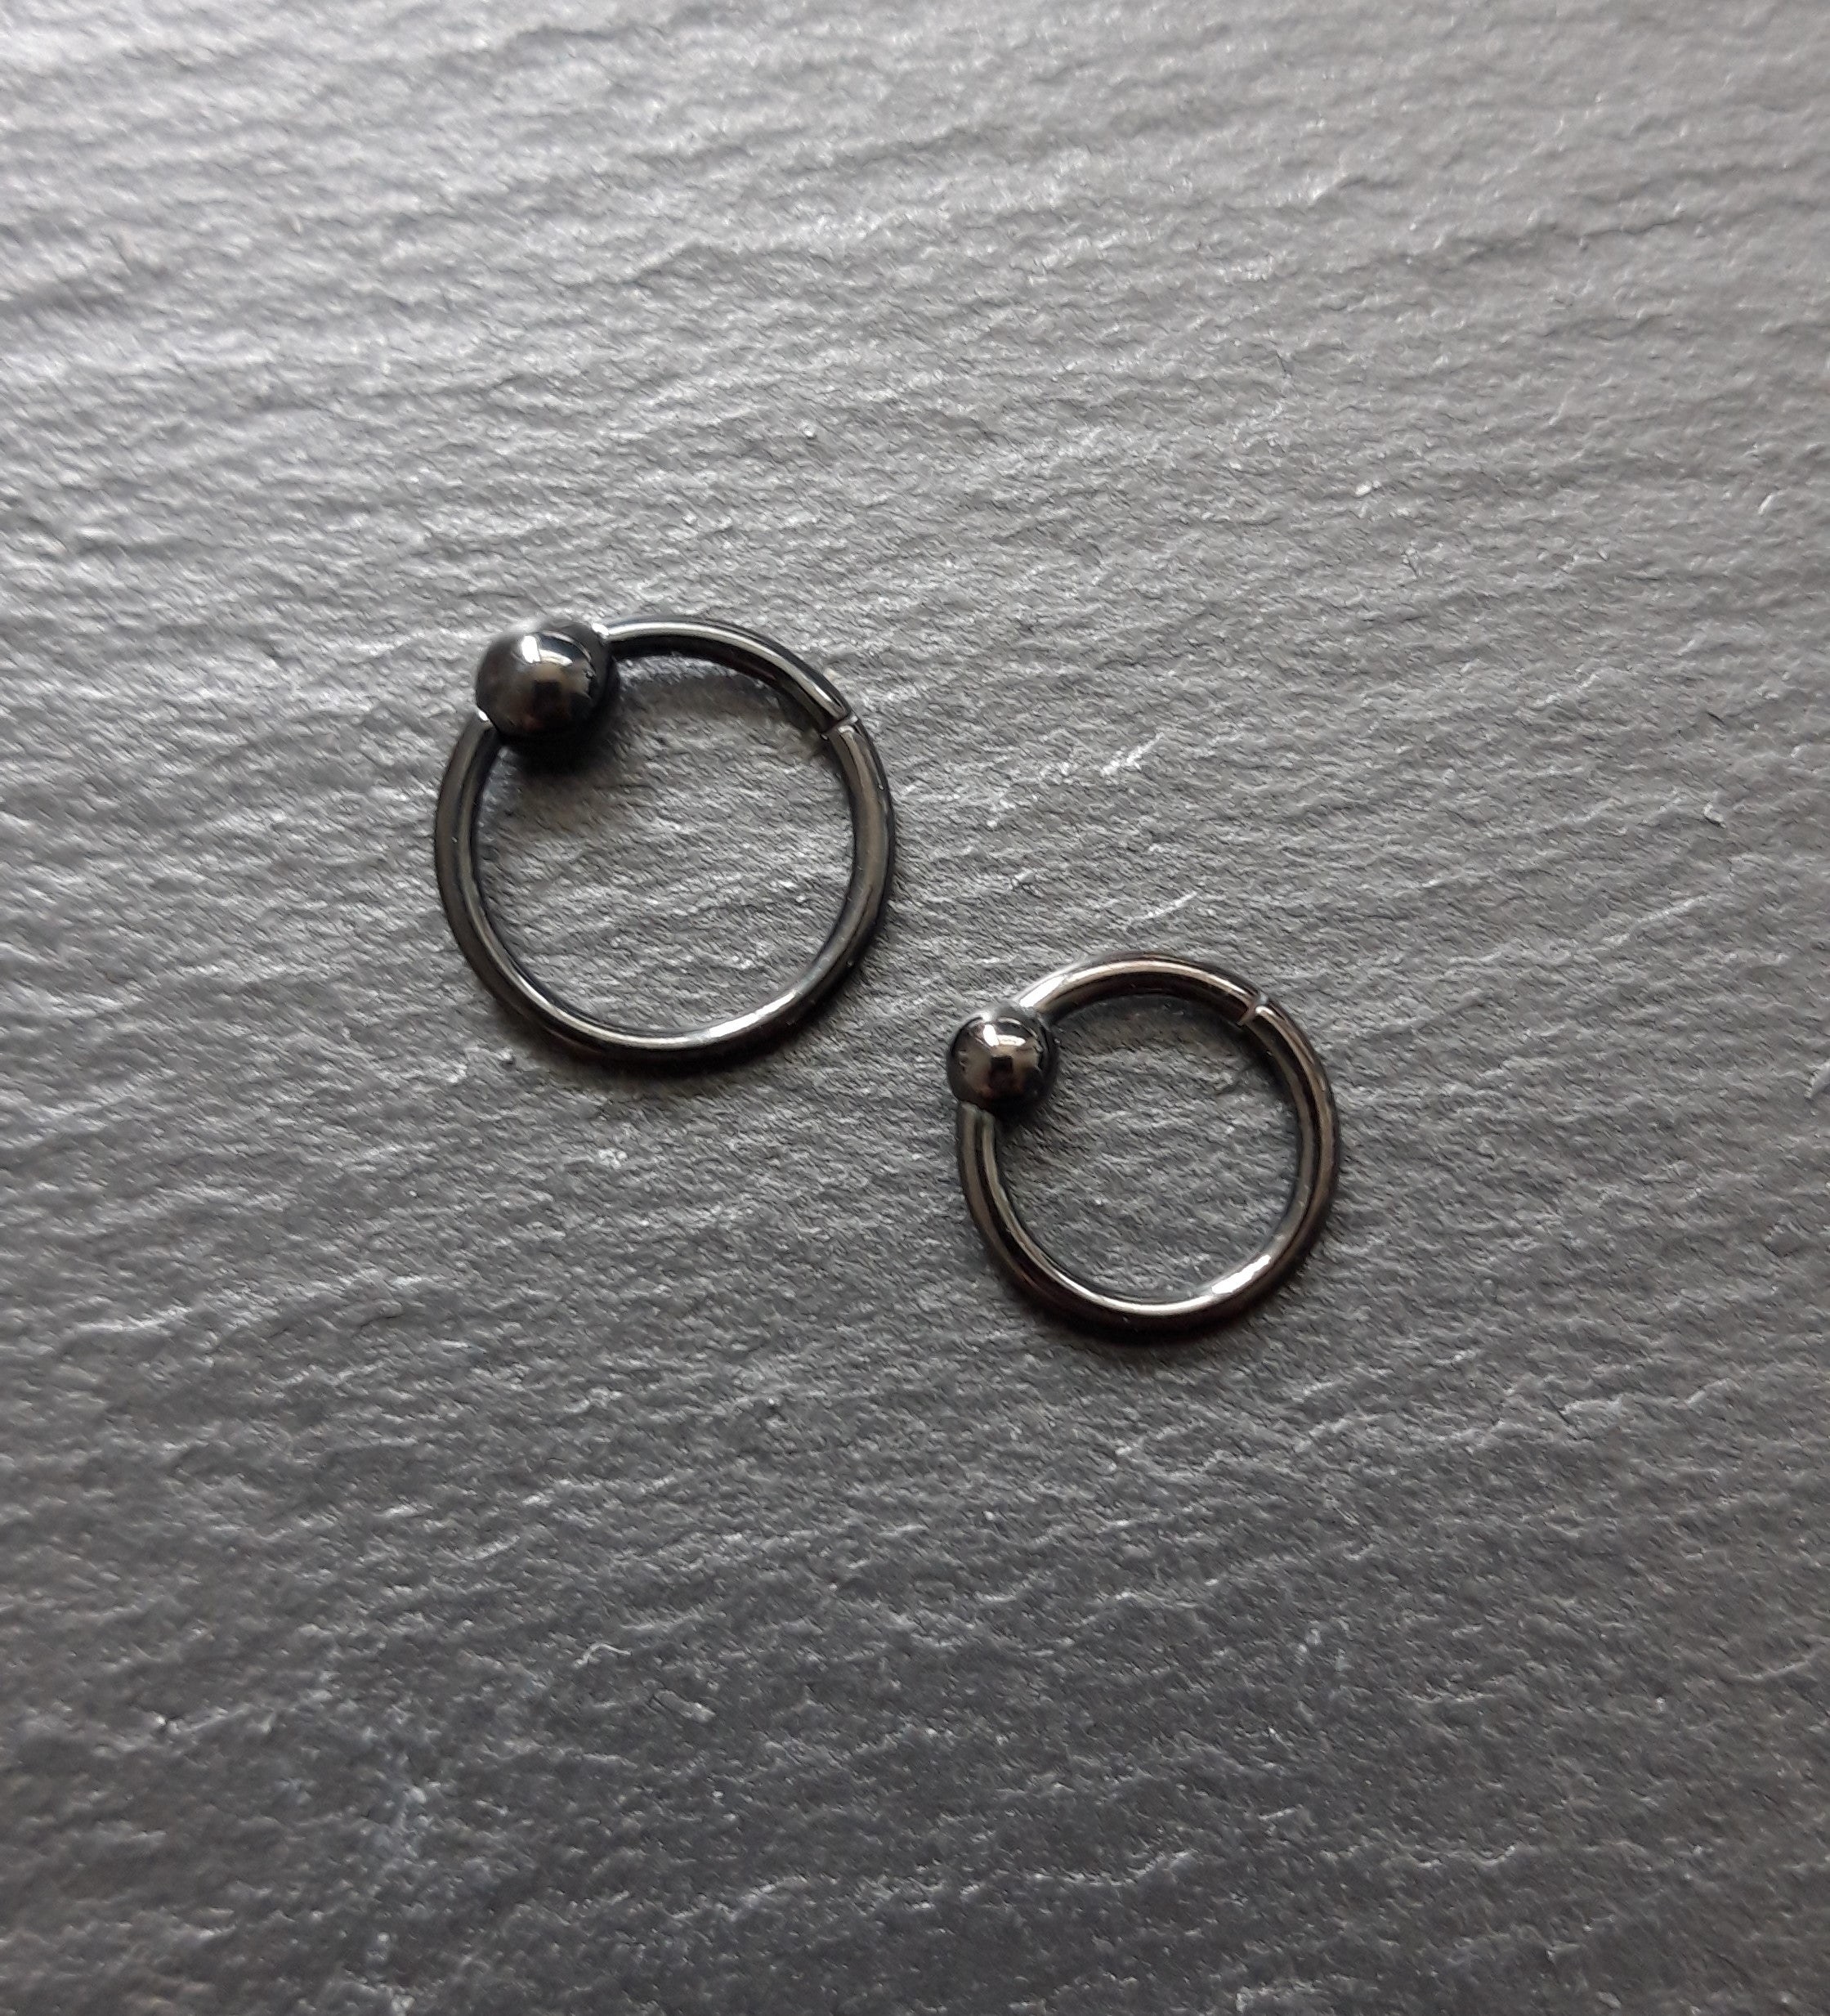 Black Steel Segment Ring Clicker with ball - thickness 1.2mm